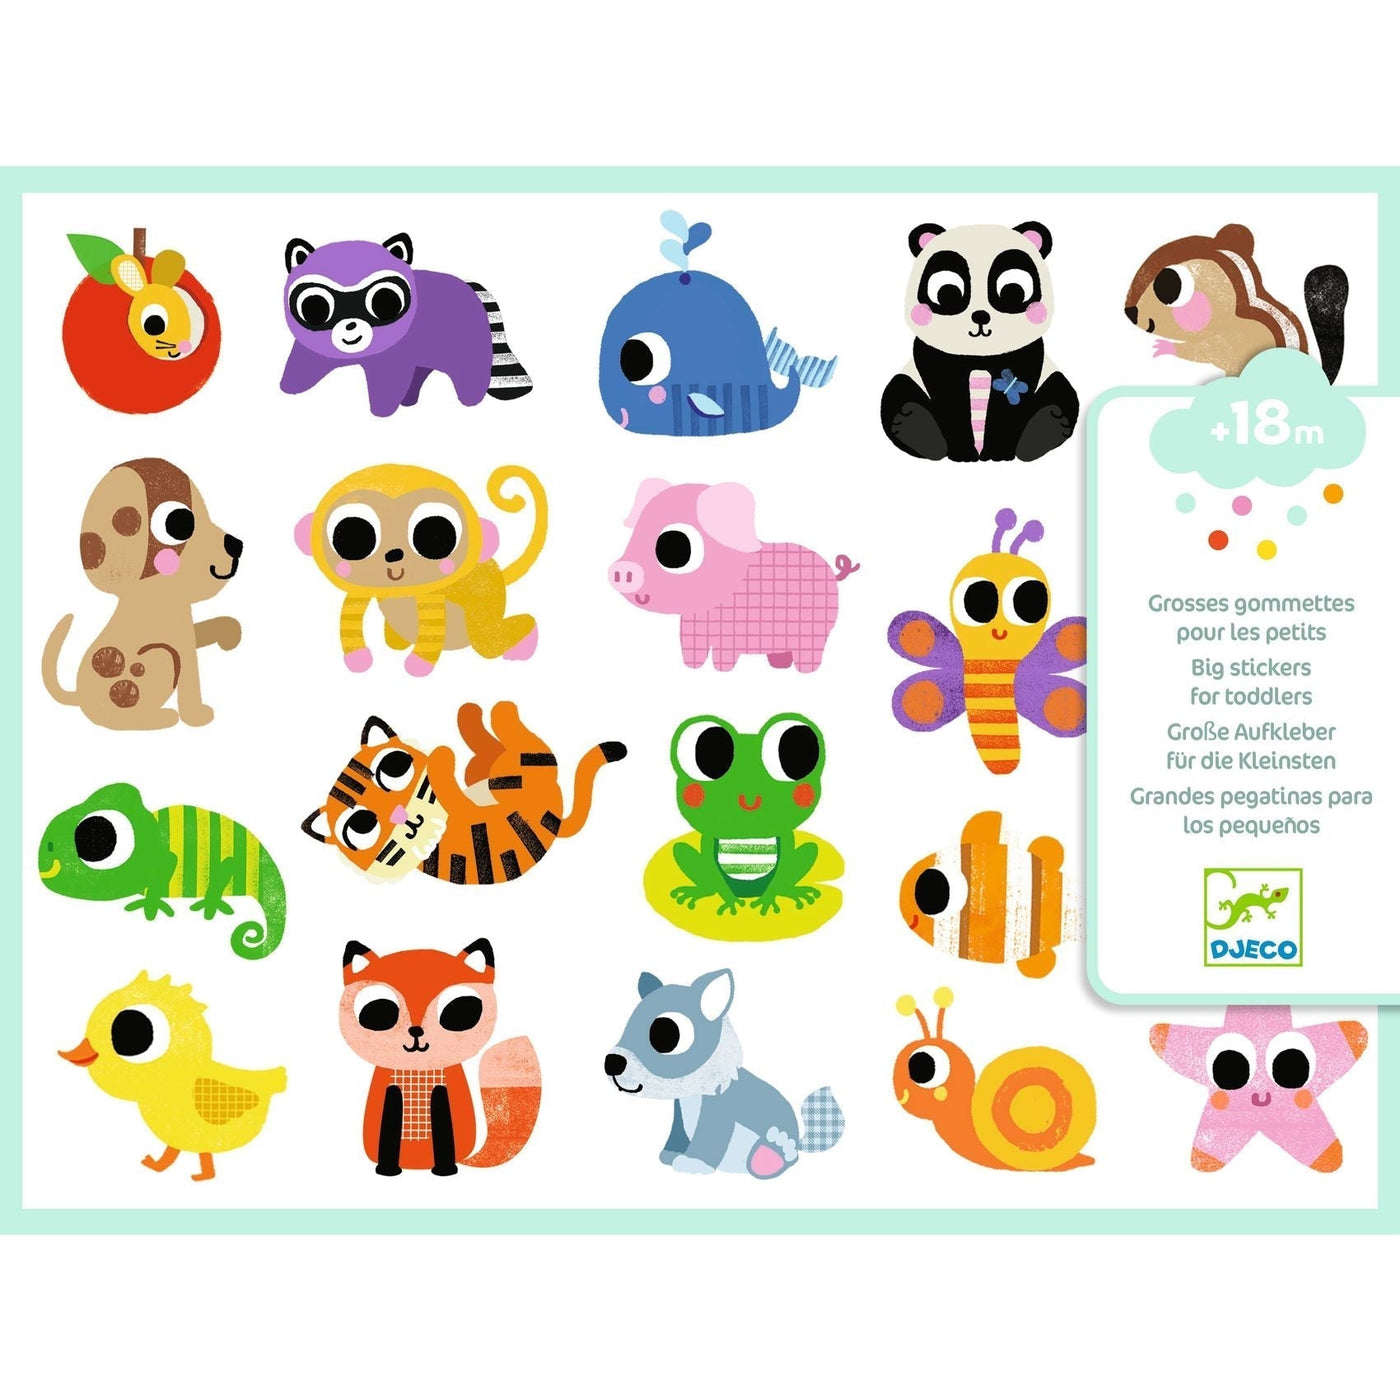 Baby Animals - Small Gifts For Little Ones - Stickers